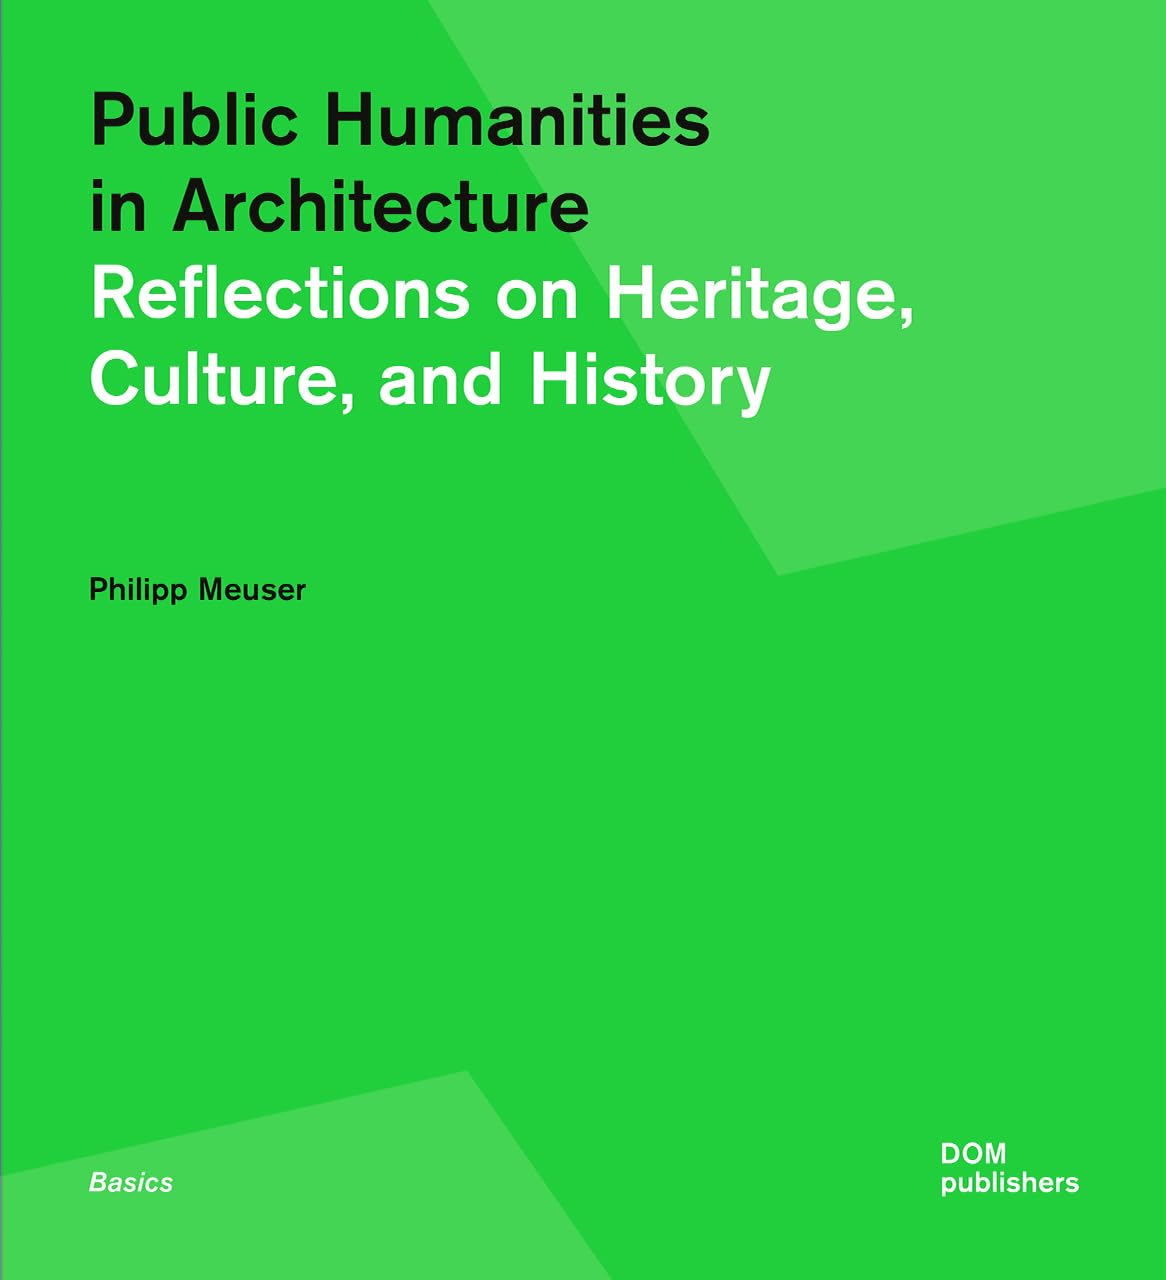 PUBLIC HUMANITIES IN ARCHITECTURE: REFLECTIONS ON HERITAGE, CULTURE, AND HISTORY